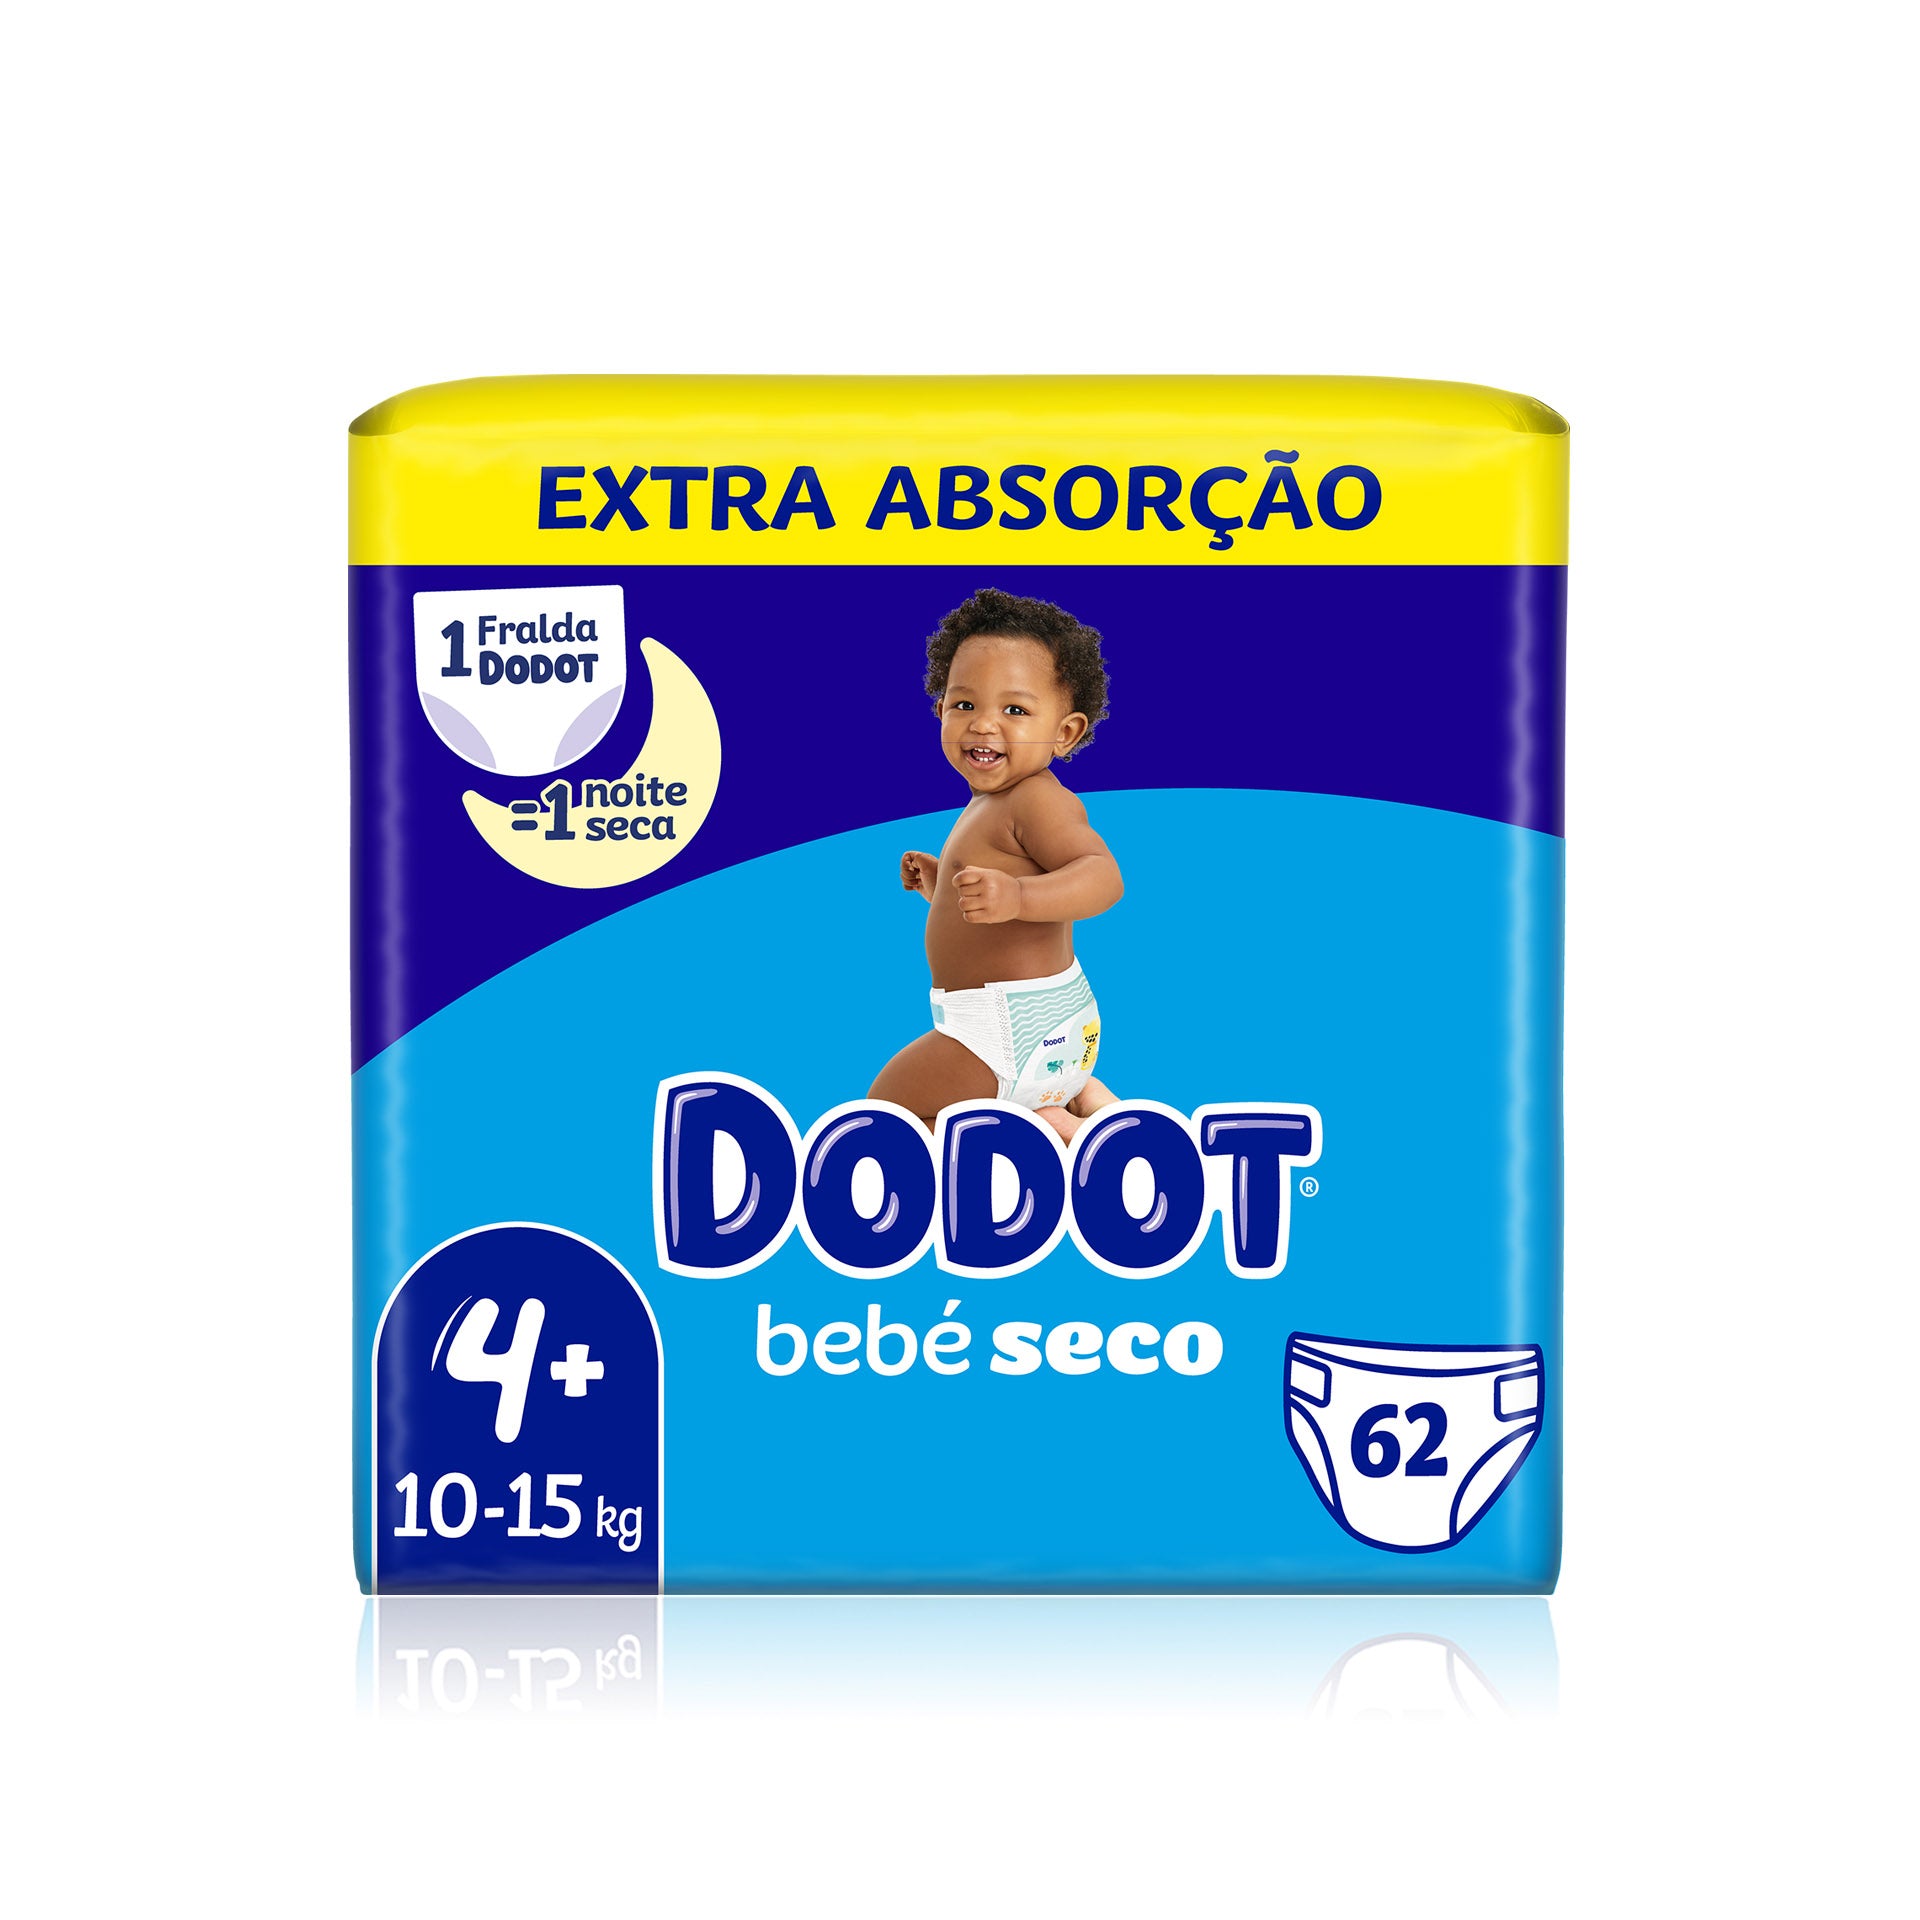 Dodot Baby Dry Extra T4 Pañales (10-15 kg) 62ud